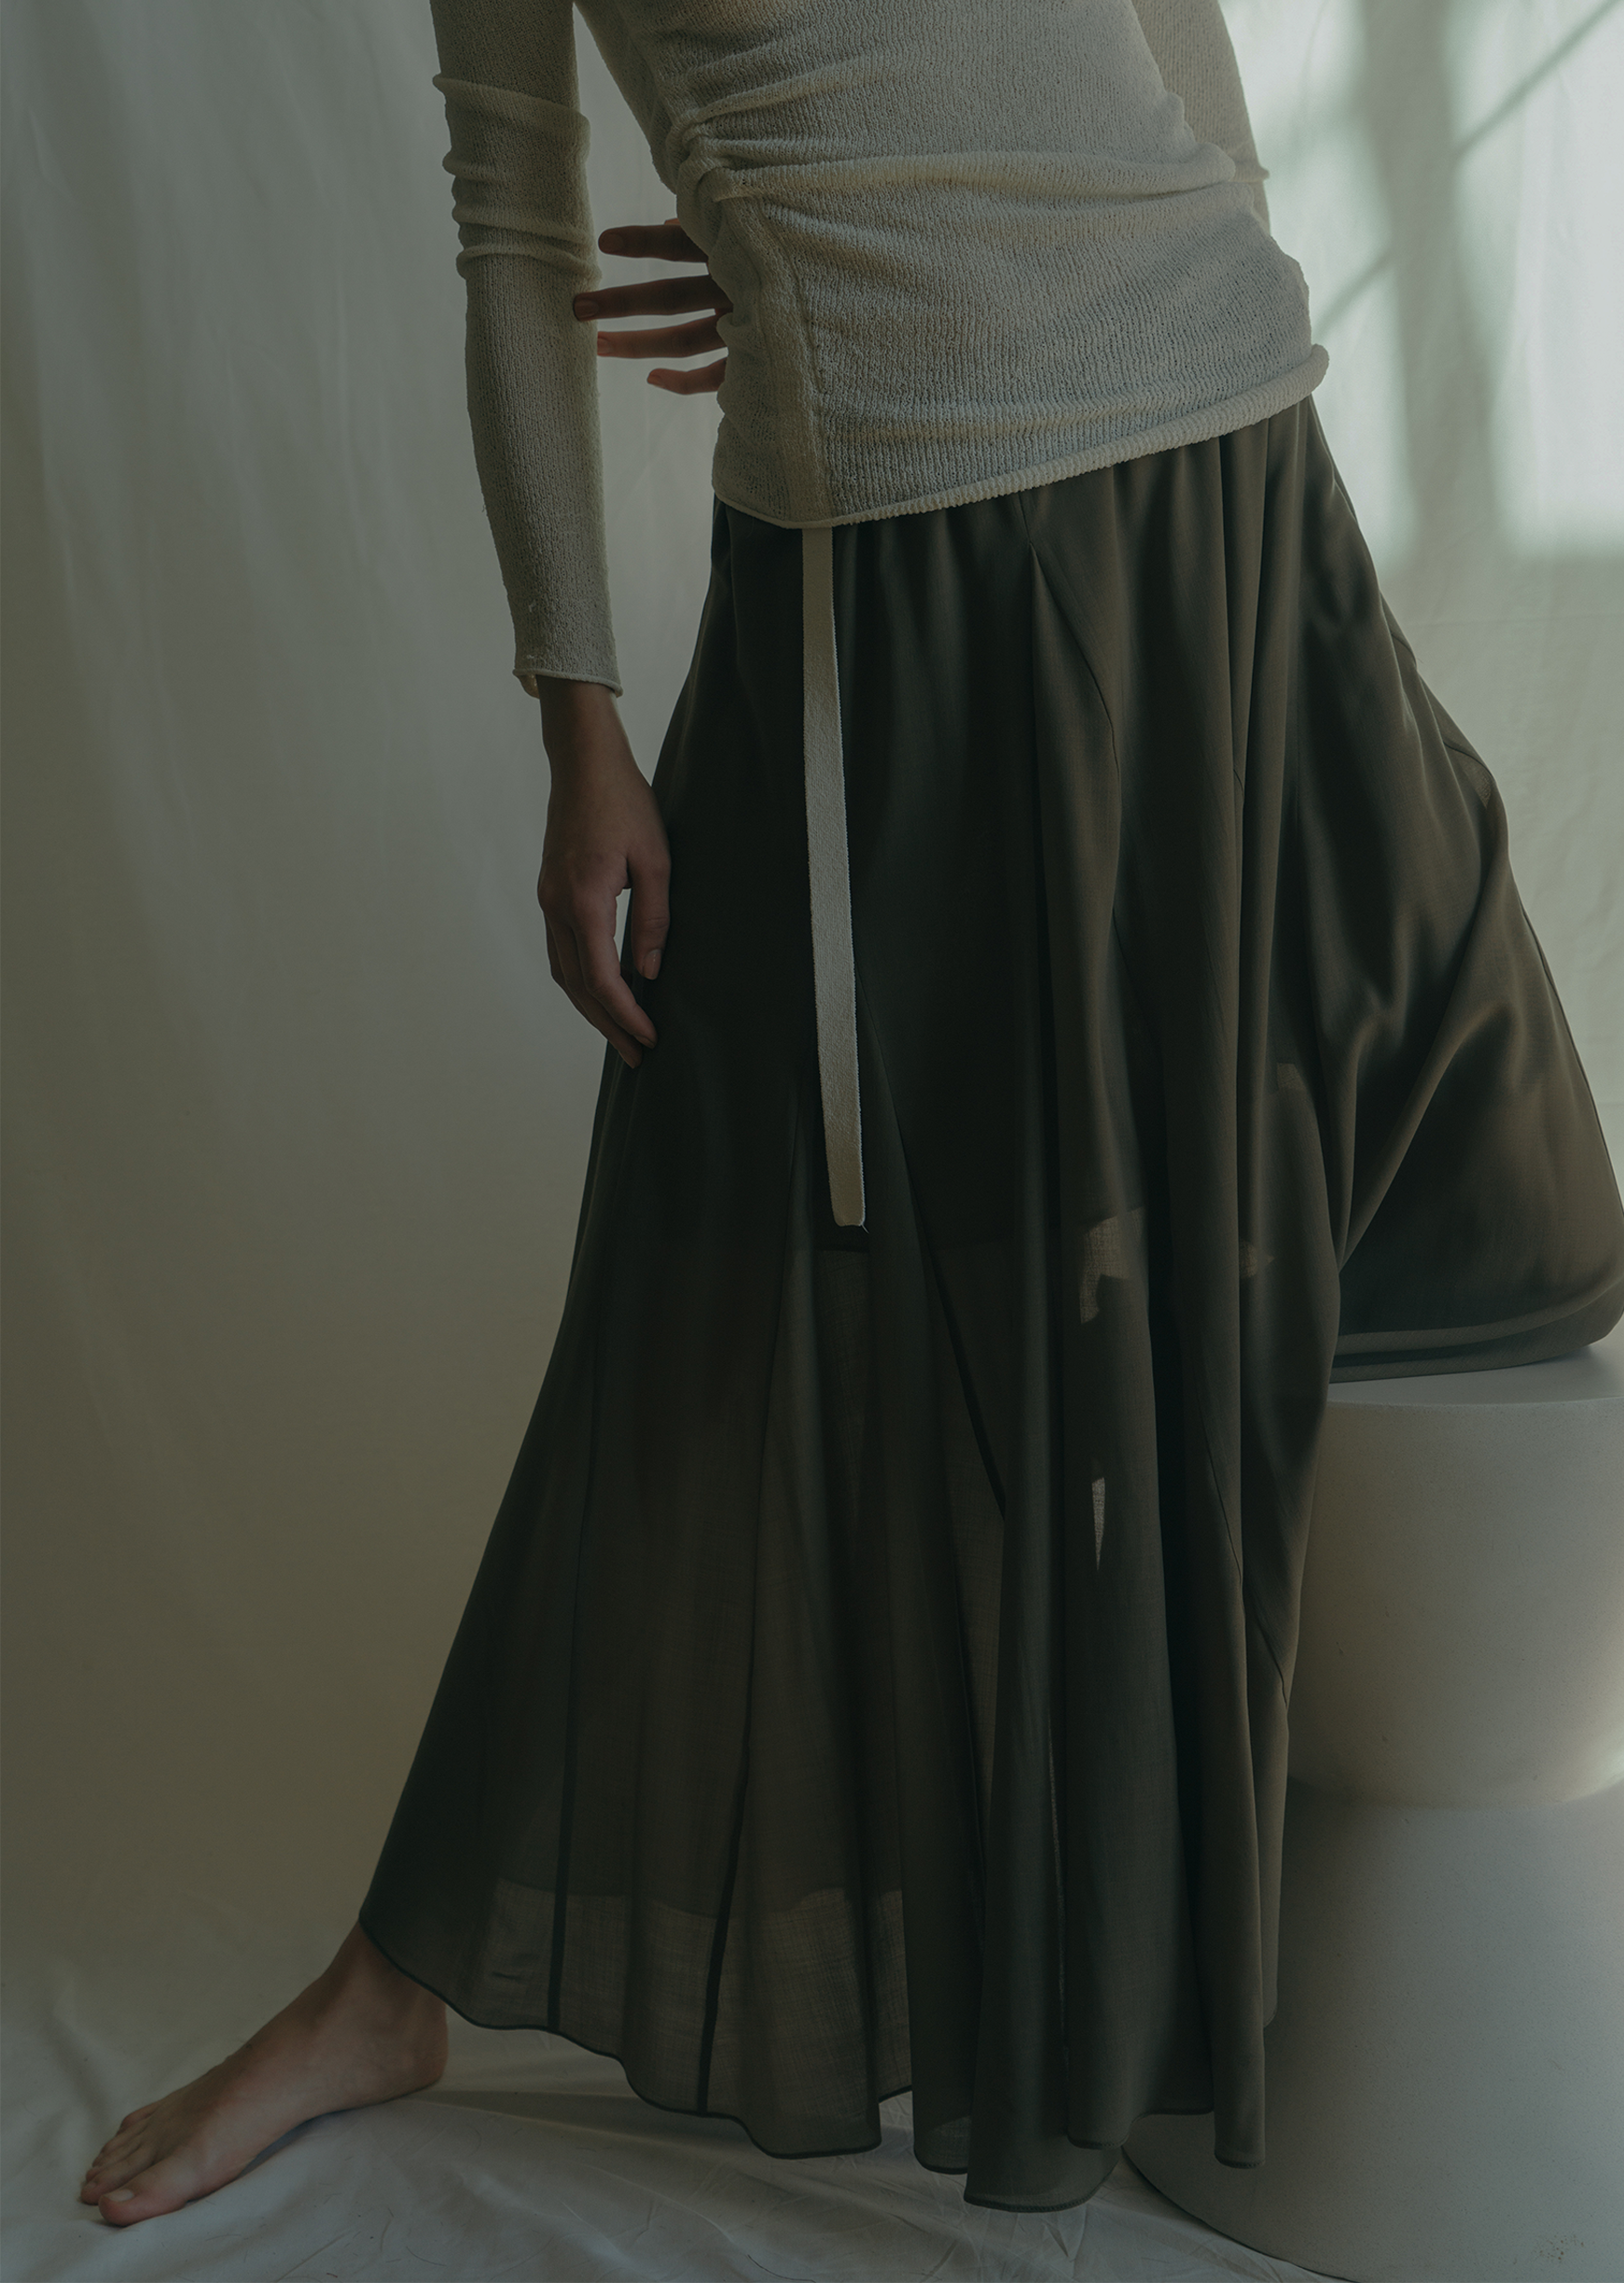 Cll skirt